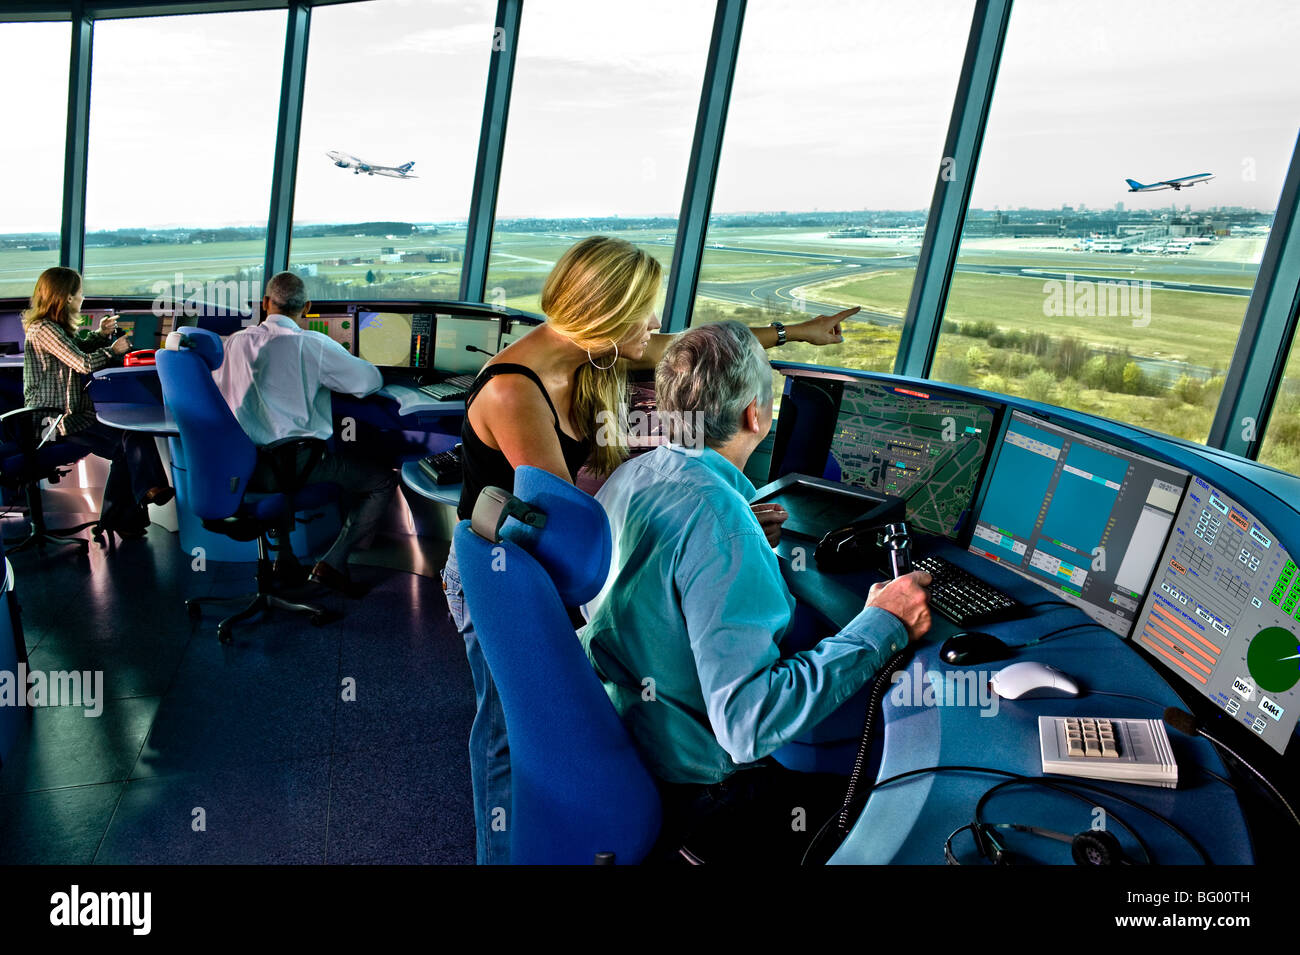 airport control tower Stock Photo